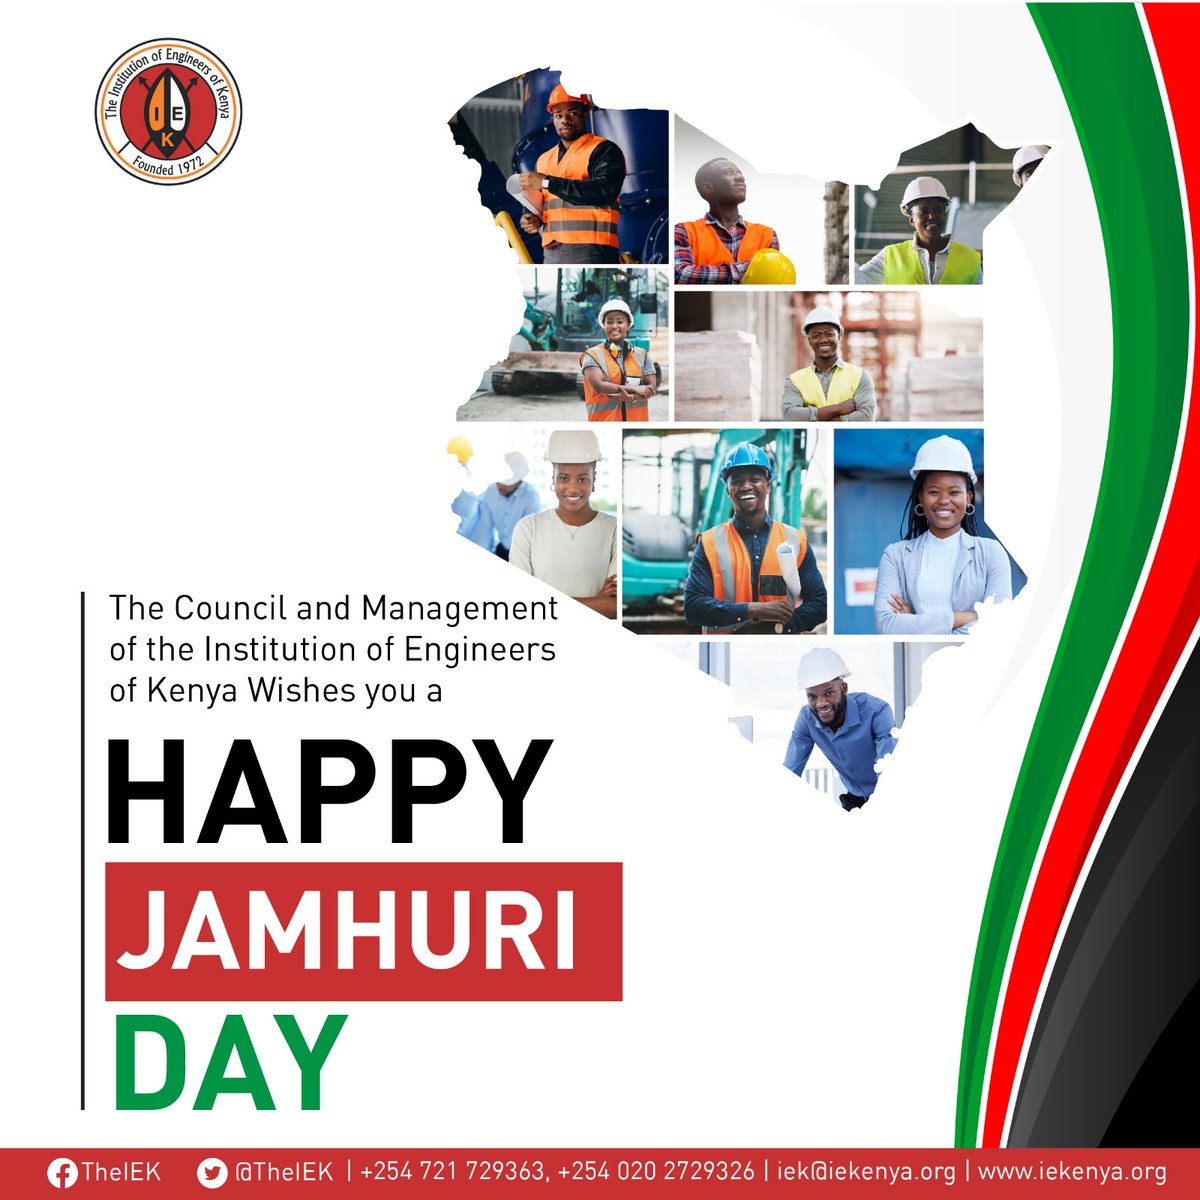 The Council and Management of the Institution of Engineers of Kenya Wishes you a Happy Jamhuri Day.